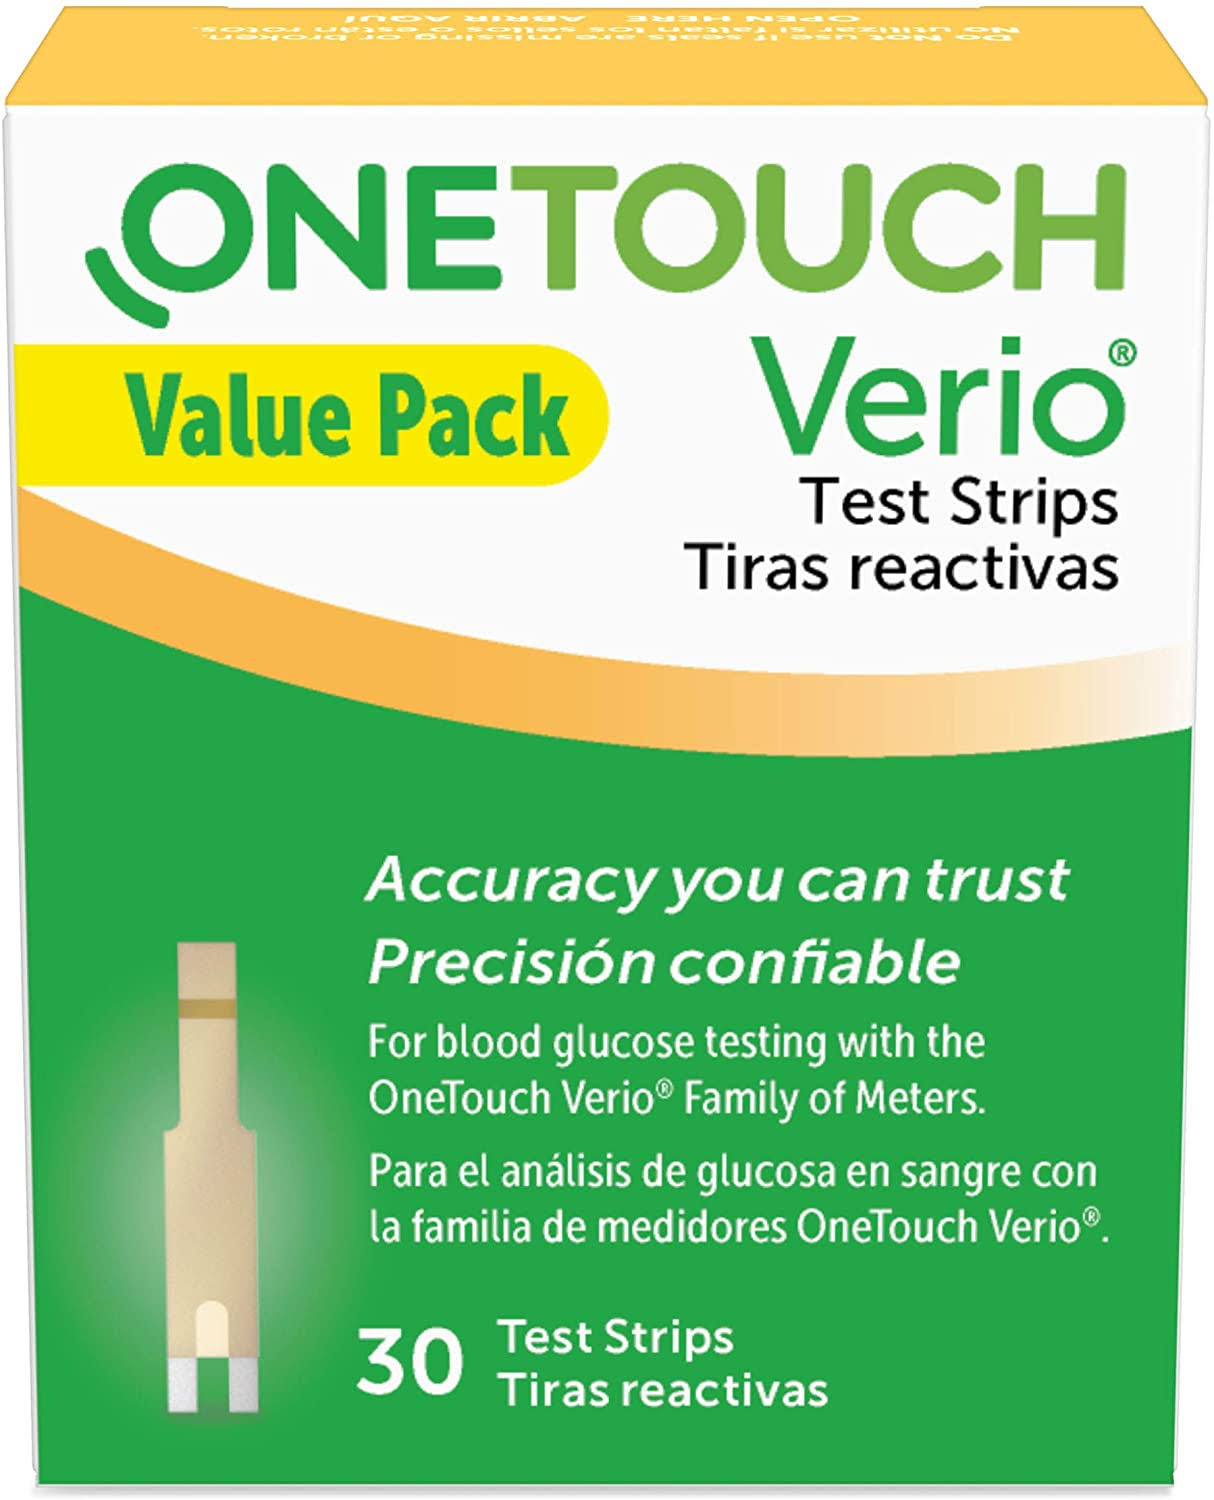 One Touch Verio Test Strips, Value Pack - 30 test strips